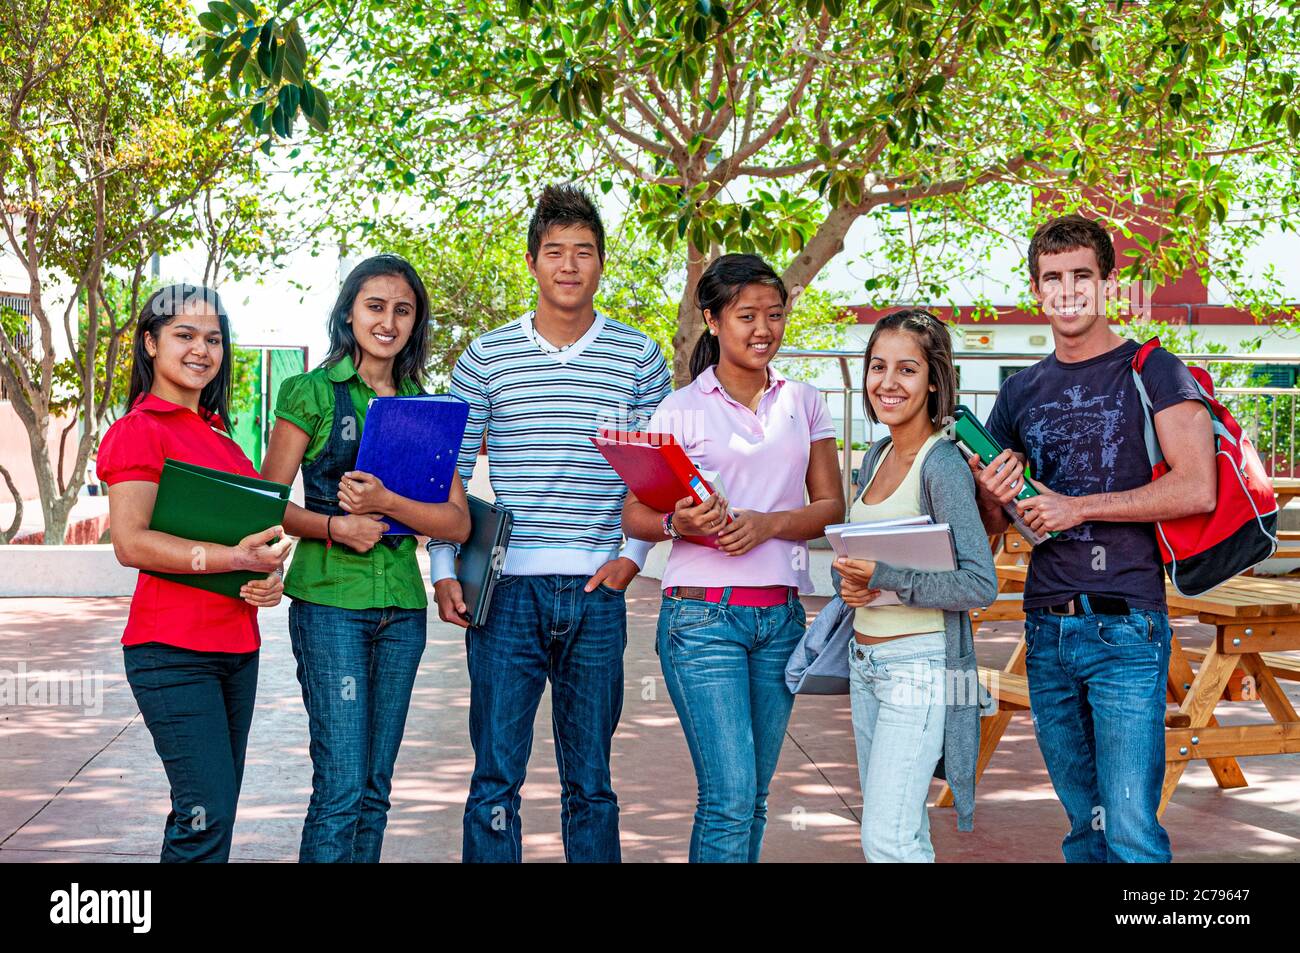 Multicultural Teenagers School group outdoors with study work folders smiling senior teenager students 15-17 years outside on school playground campus Stock Photo